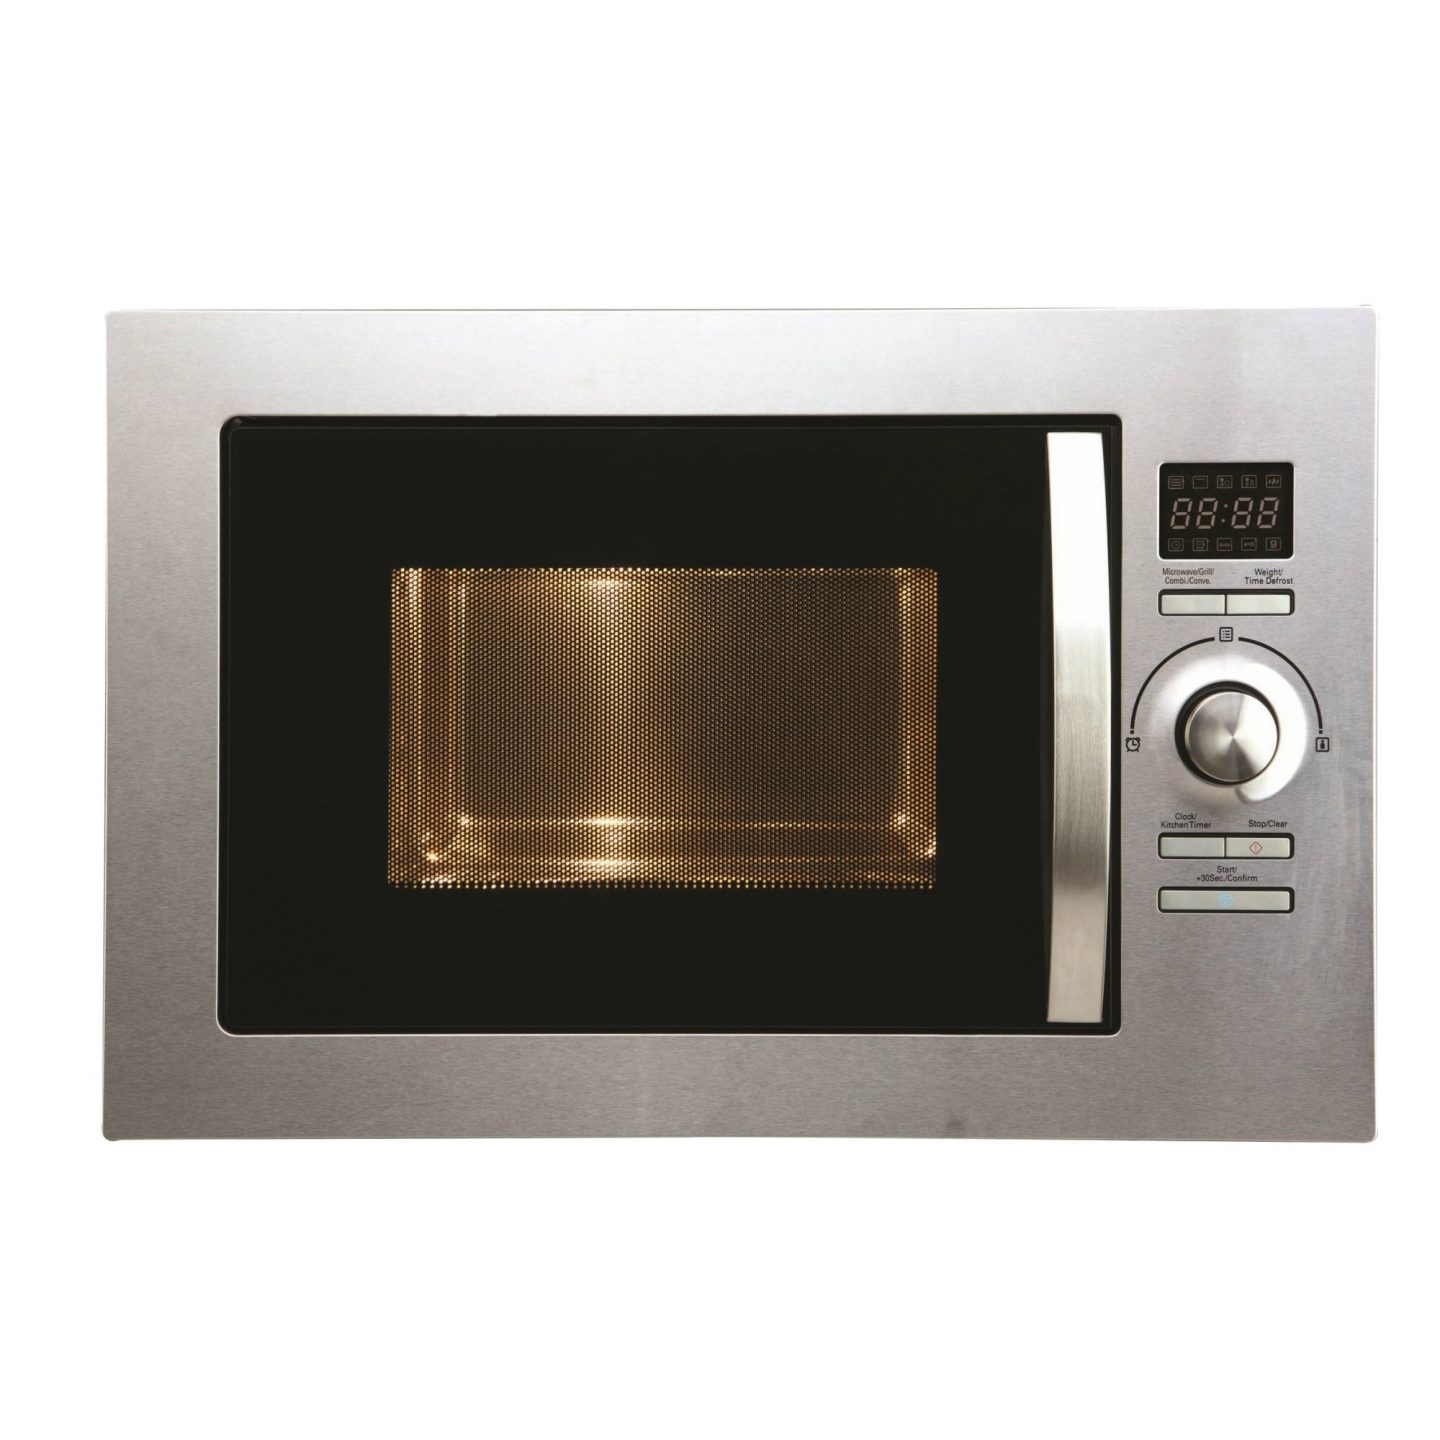 Cookology 25L Integrated Combination Microwave With Convection Oven & Grill - Stainless Steel | Cookology